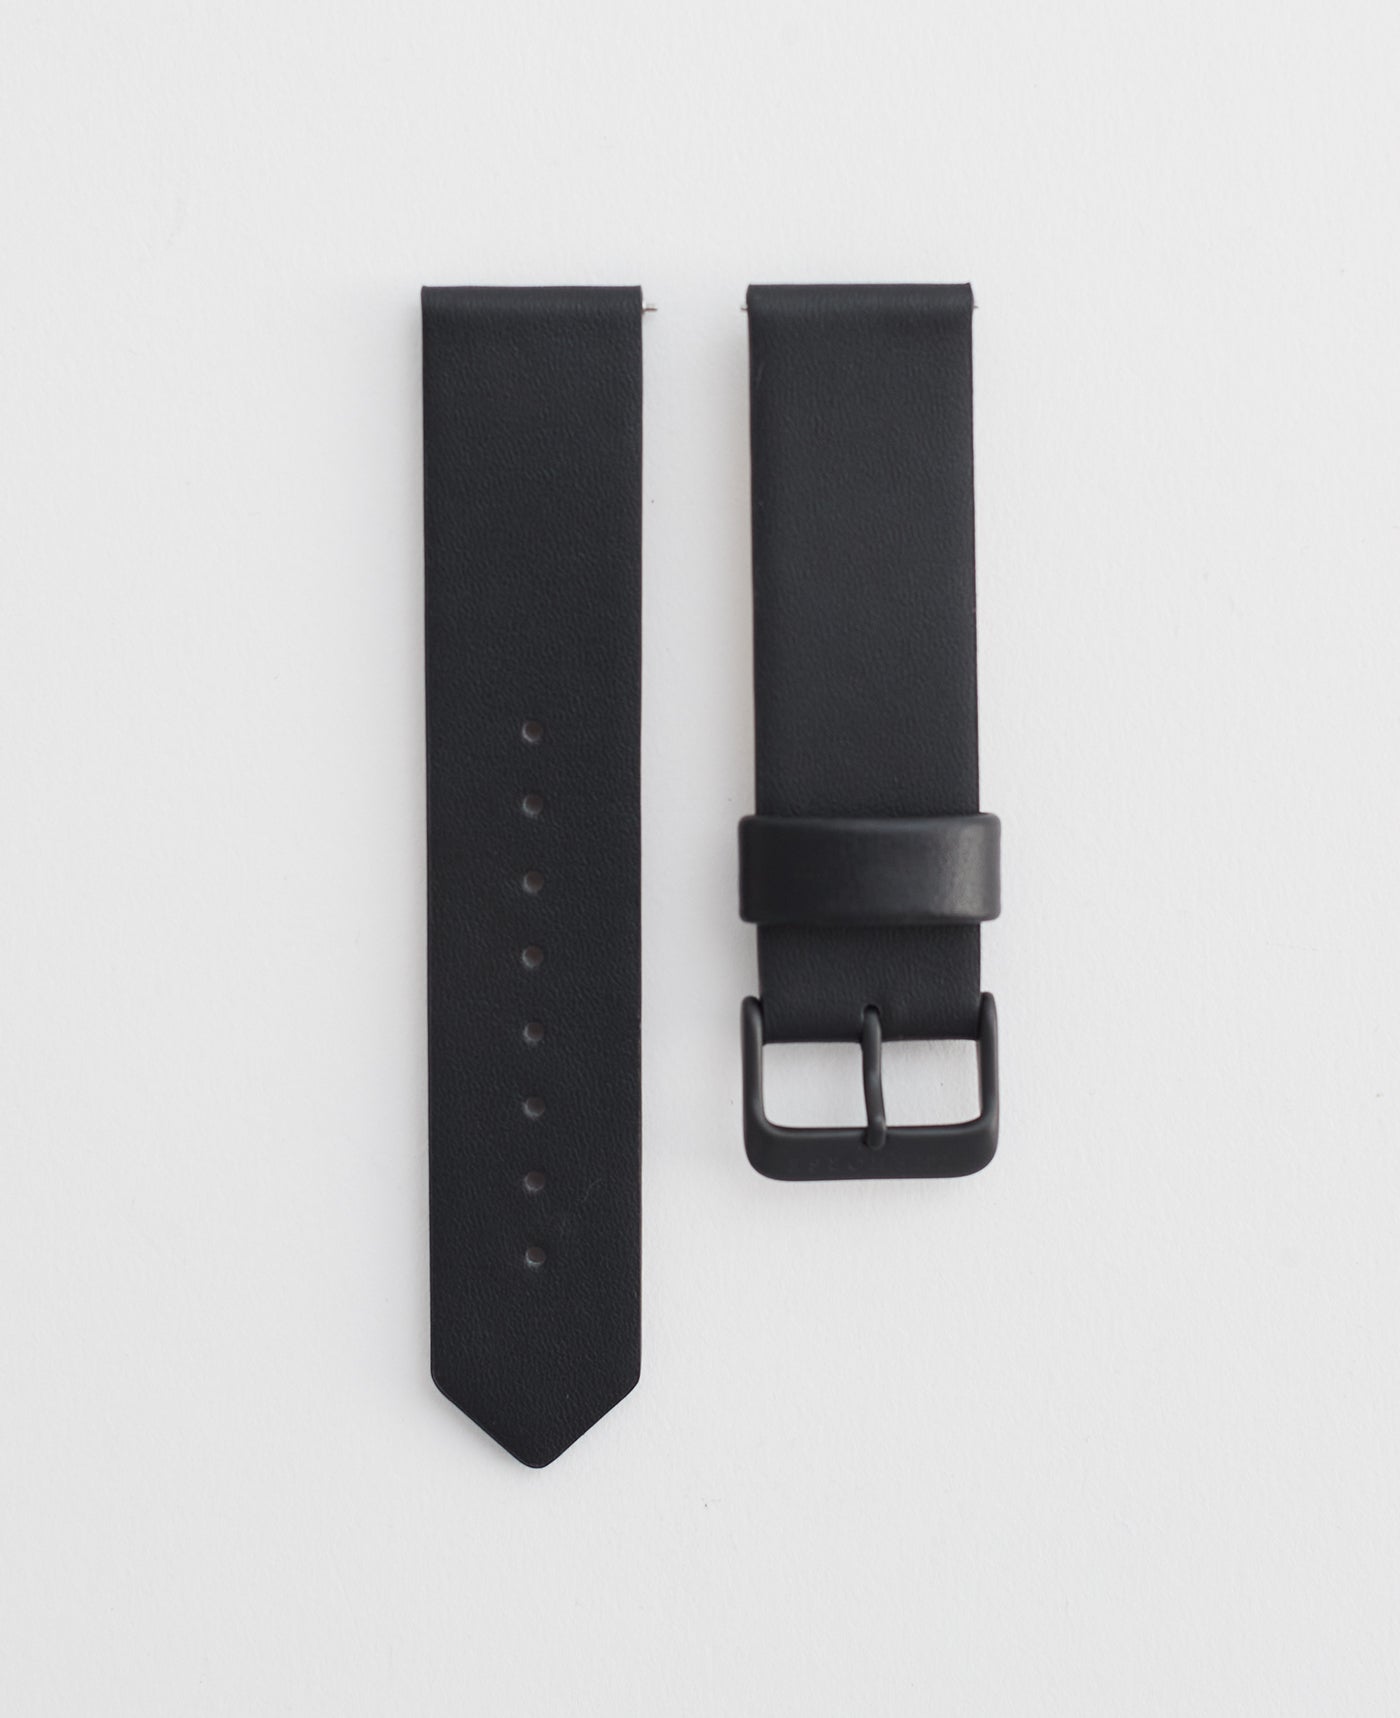 The Mini Original Strap - 18mm - Black Band / Black Buckle by The Horse®